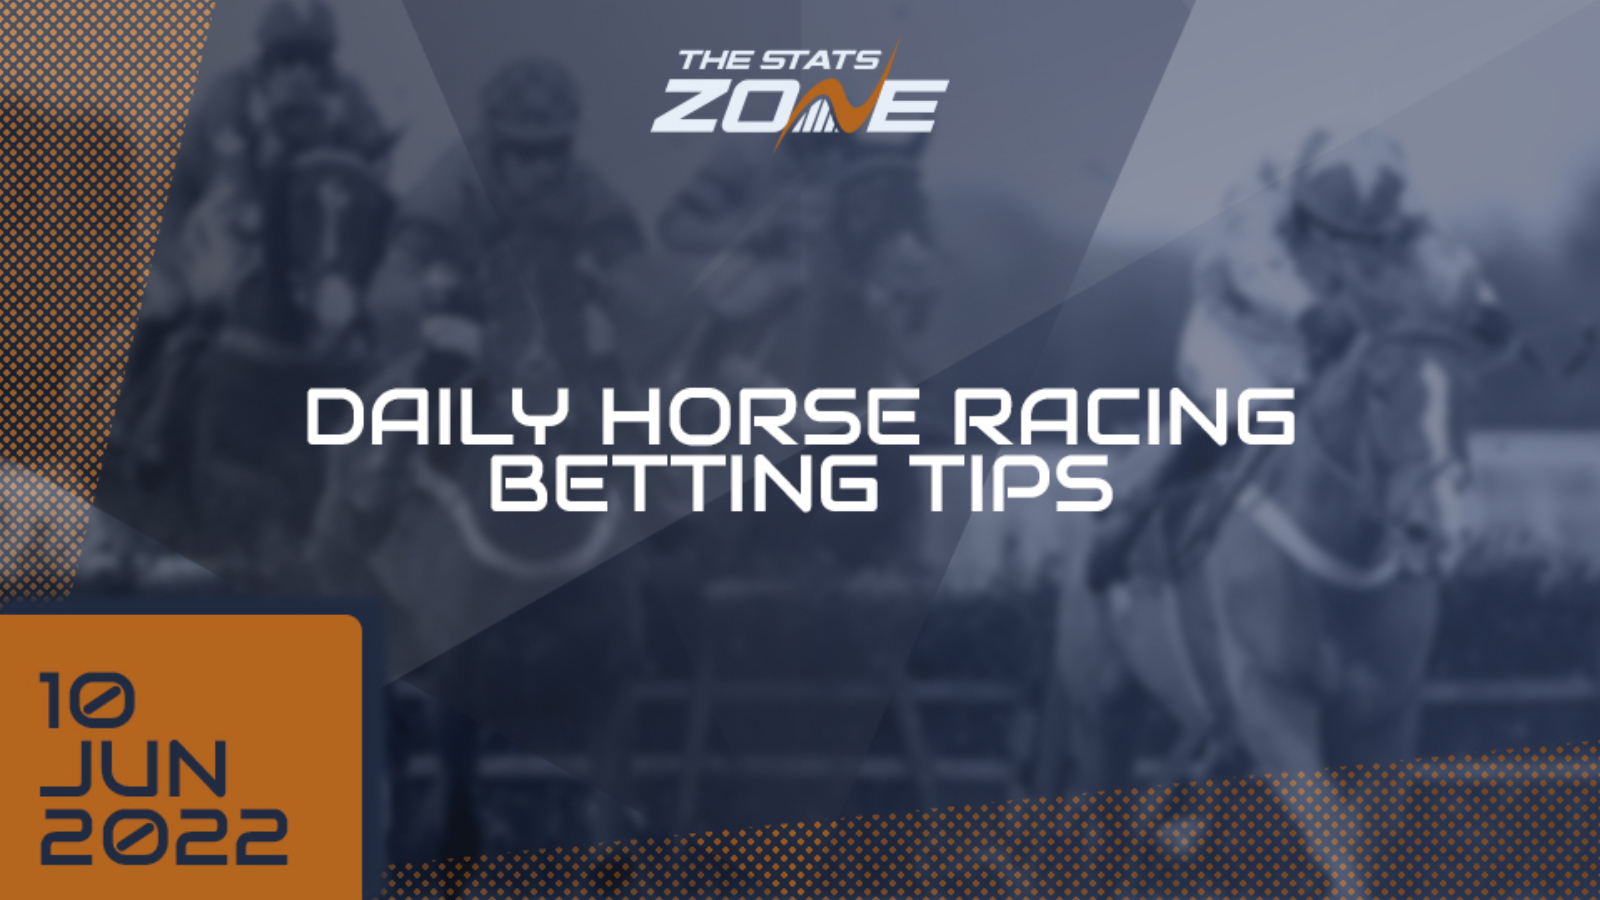 Daily Horse Racing Tips - The Stats Zone